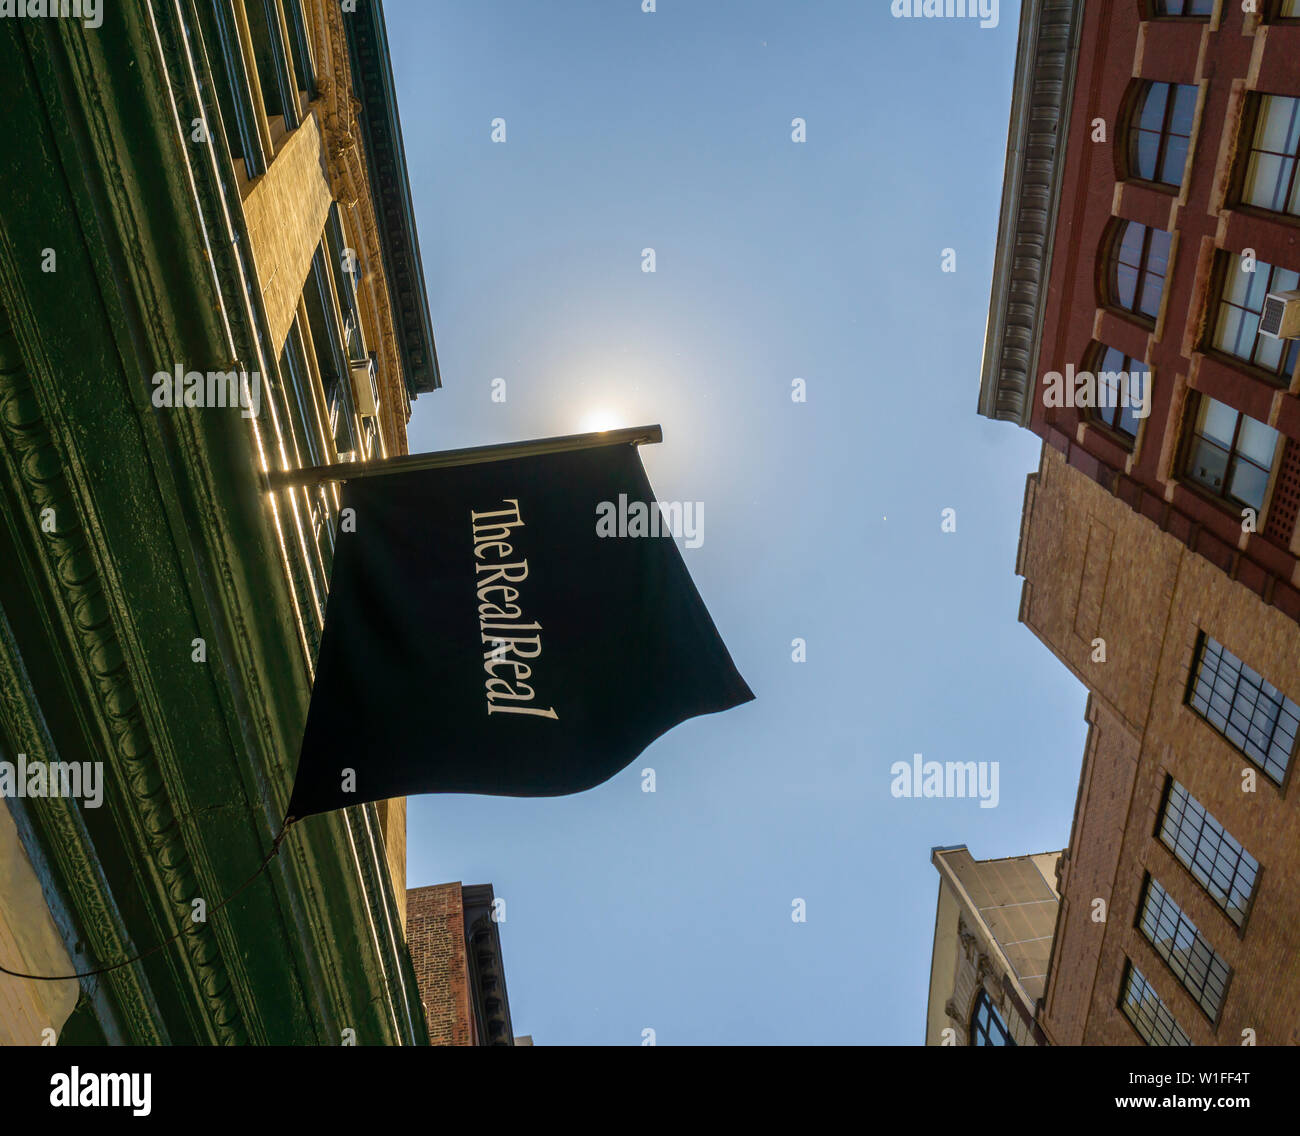 The RealReal luxury consignment store in the Soho neighborhood of New York on Wednesday, June 26, 2019. The startup, which sells after authentication previously owned luxury goods on consignment is launching its initial public offering later this week. The estimate for the total luxury resale market in the U.S. is $6 billion. (© Richard B. Levine) Stock Photo